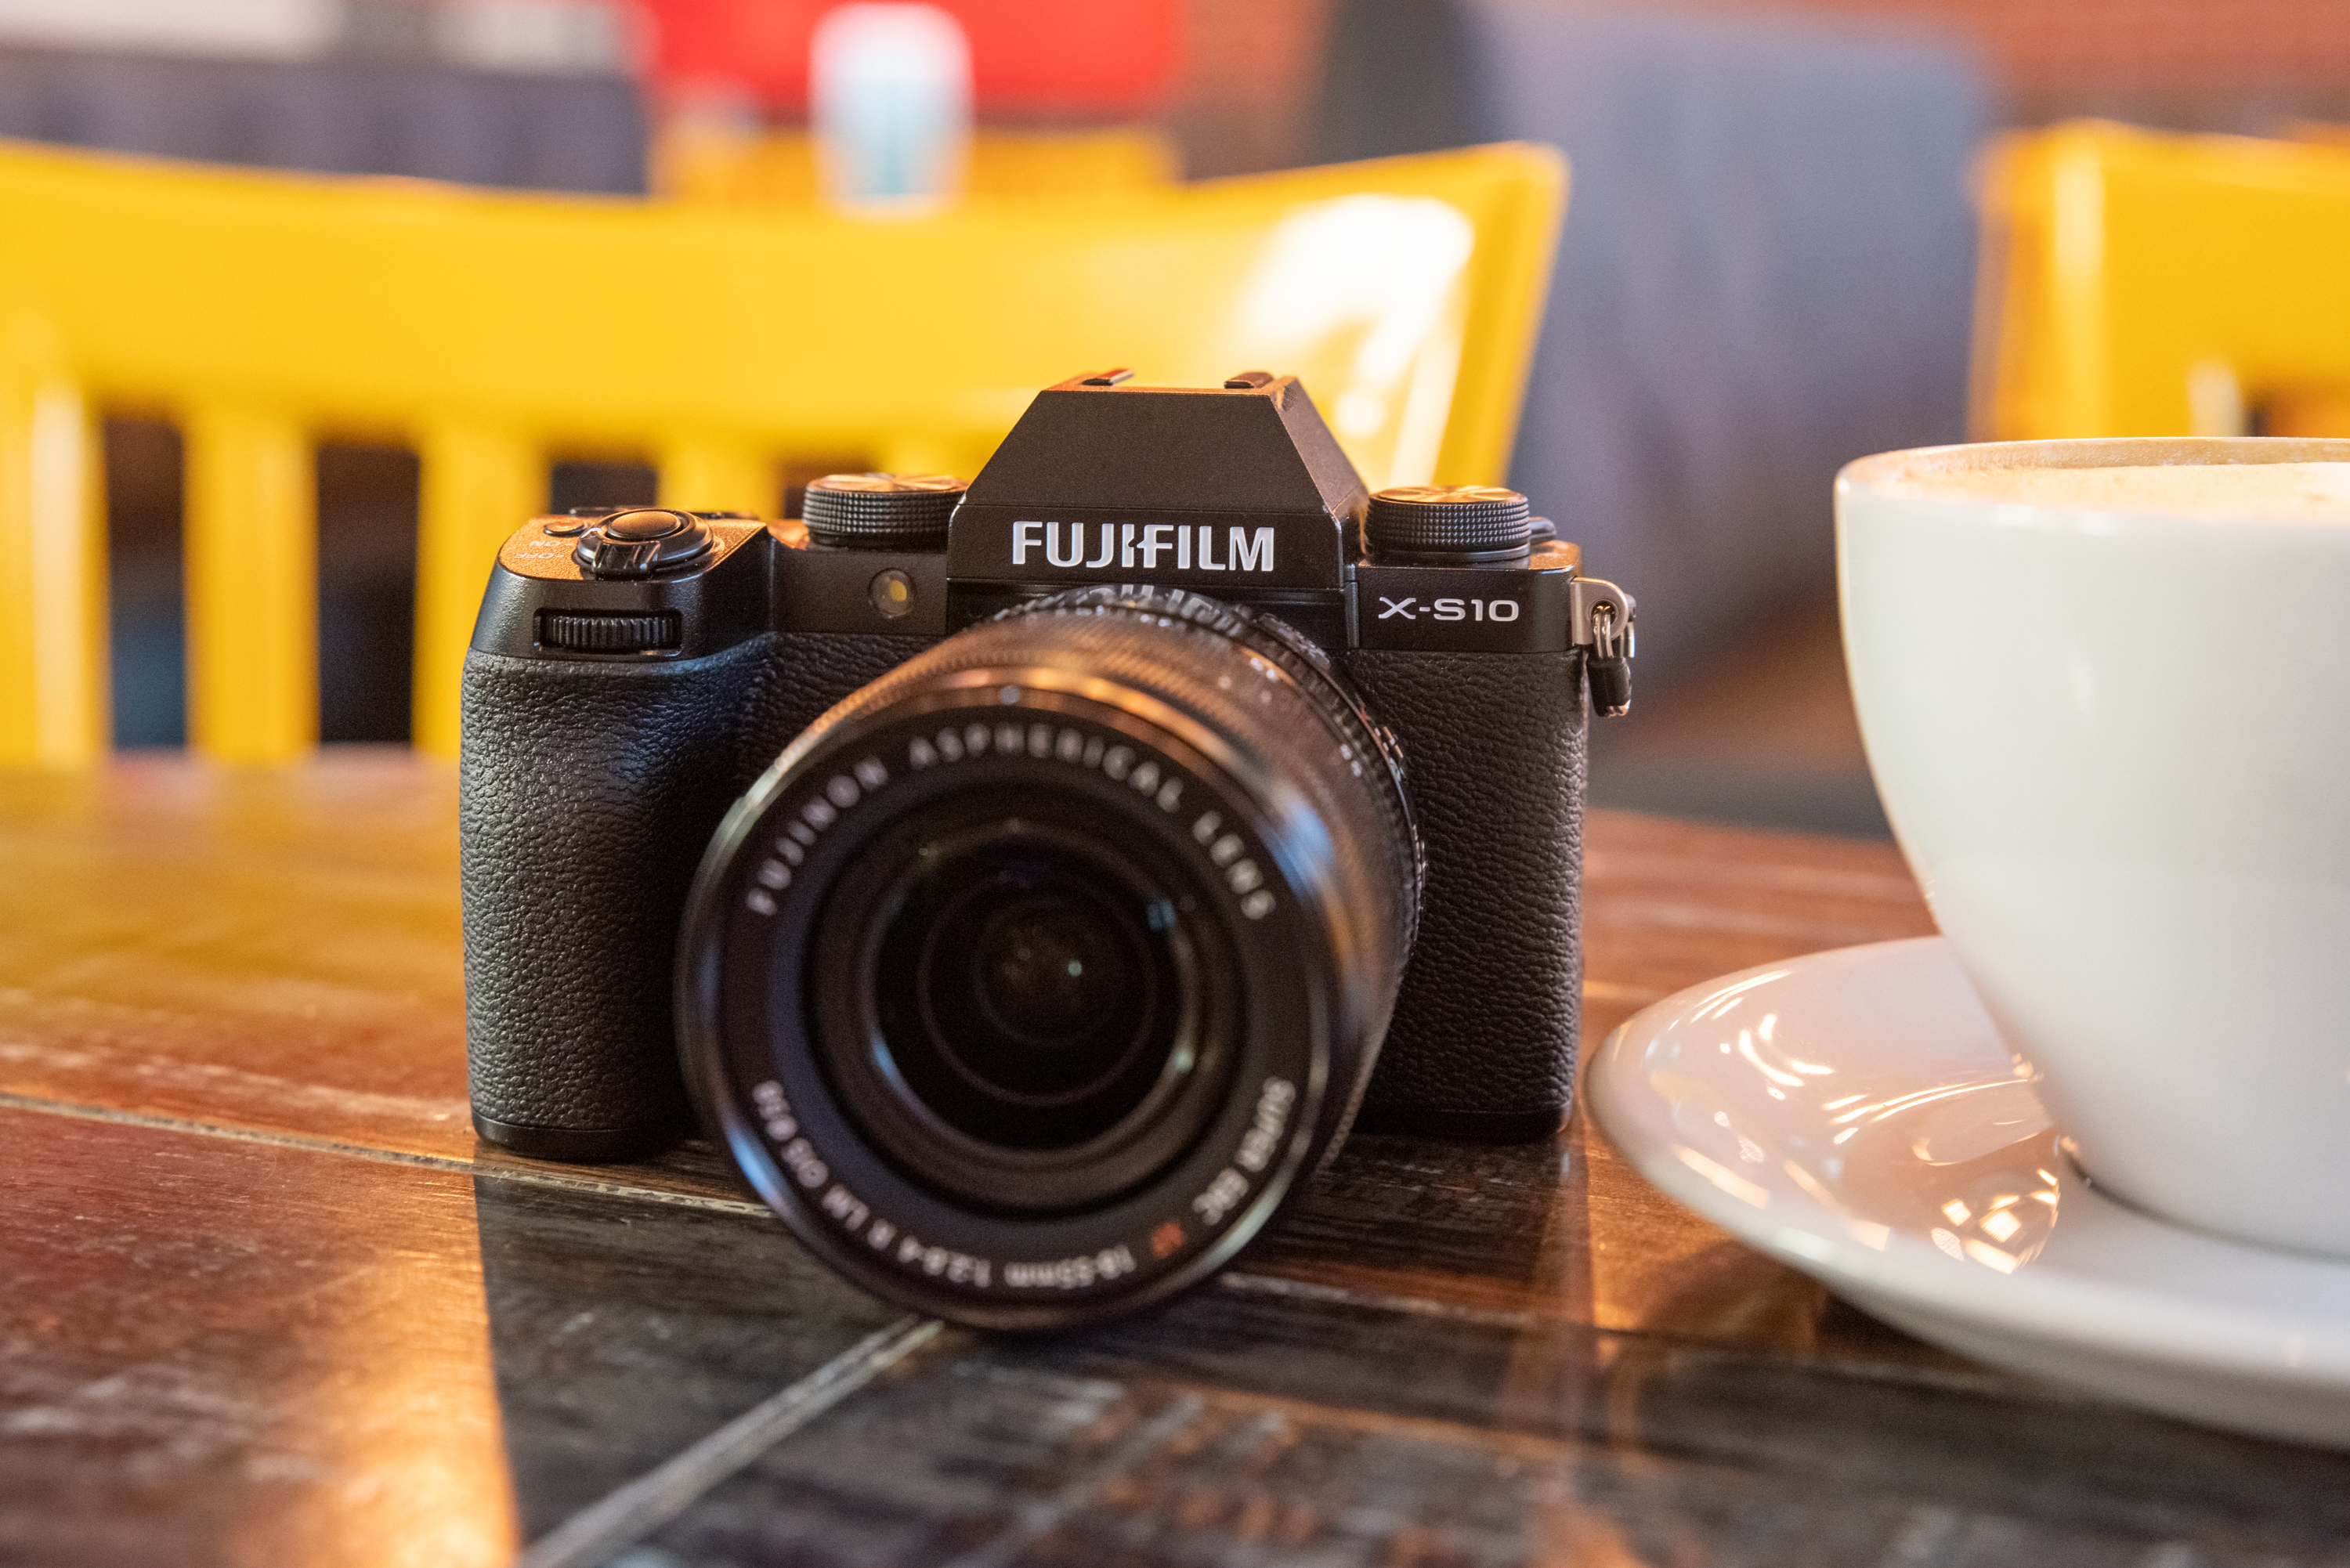 A Wonderful Camera With An Unfortunate Flaw. Fujifilm XS10 Review